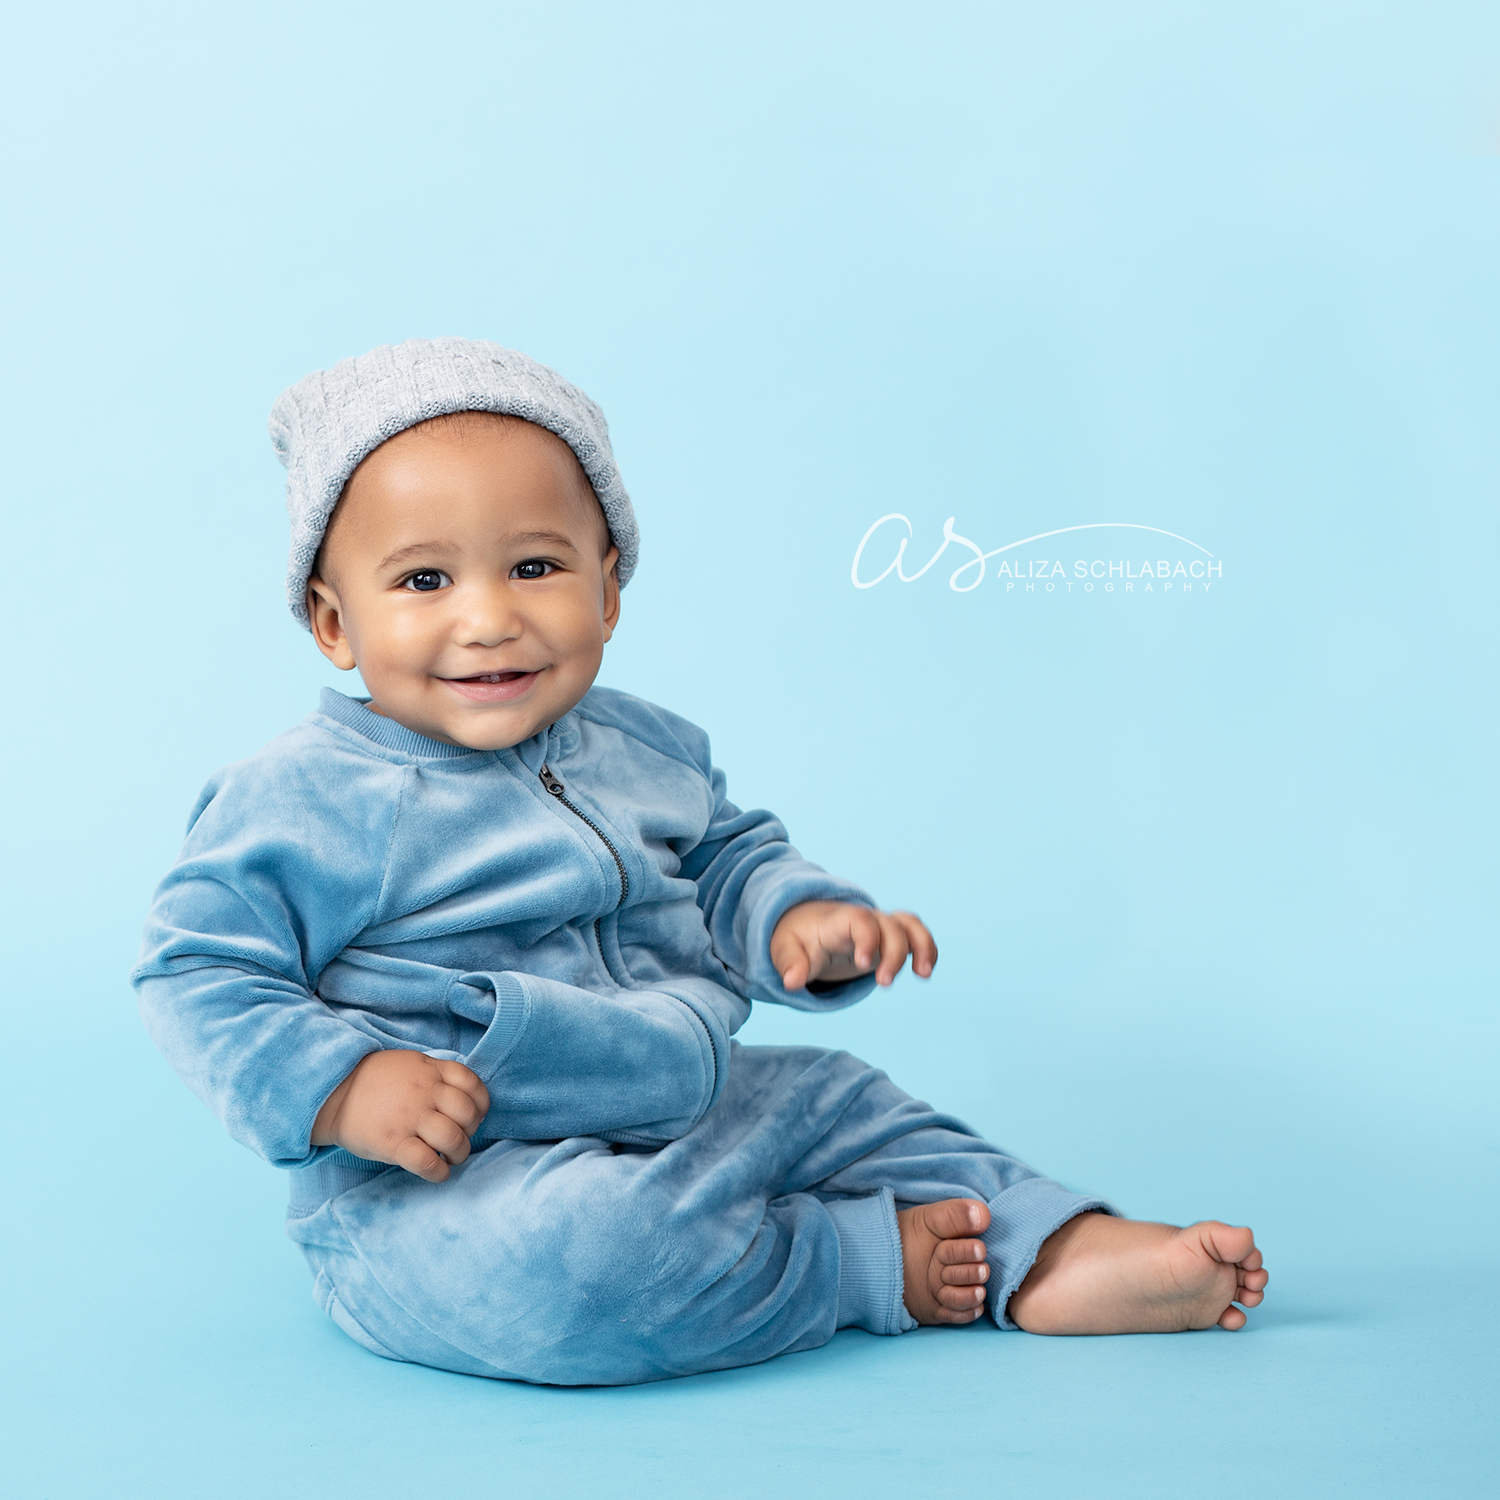 Adorable black baby sitting up in a blue track suit and hat